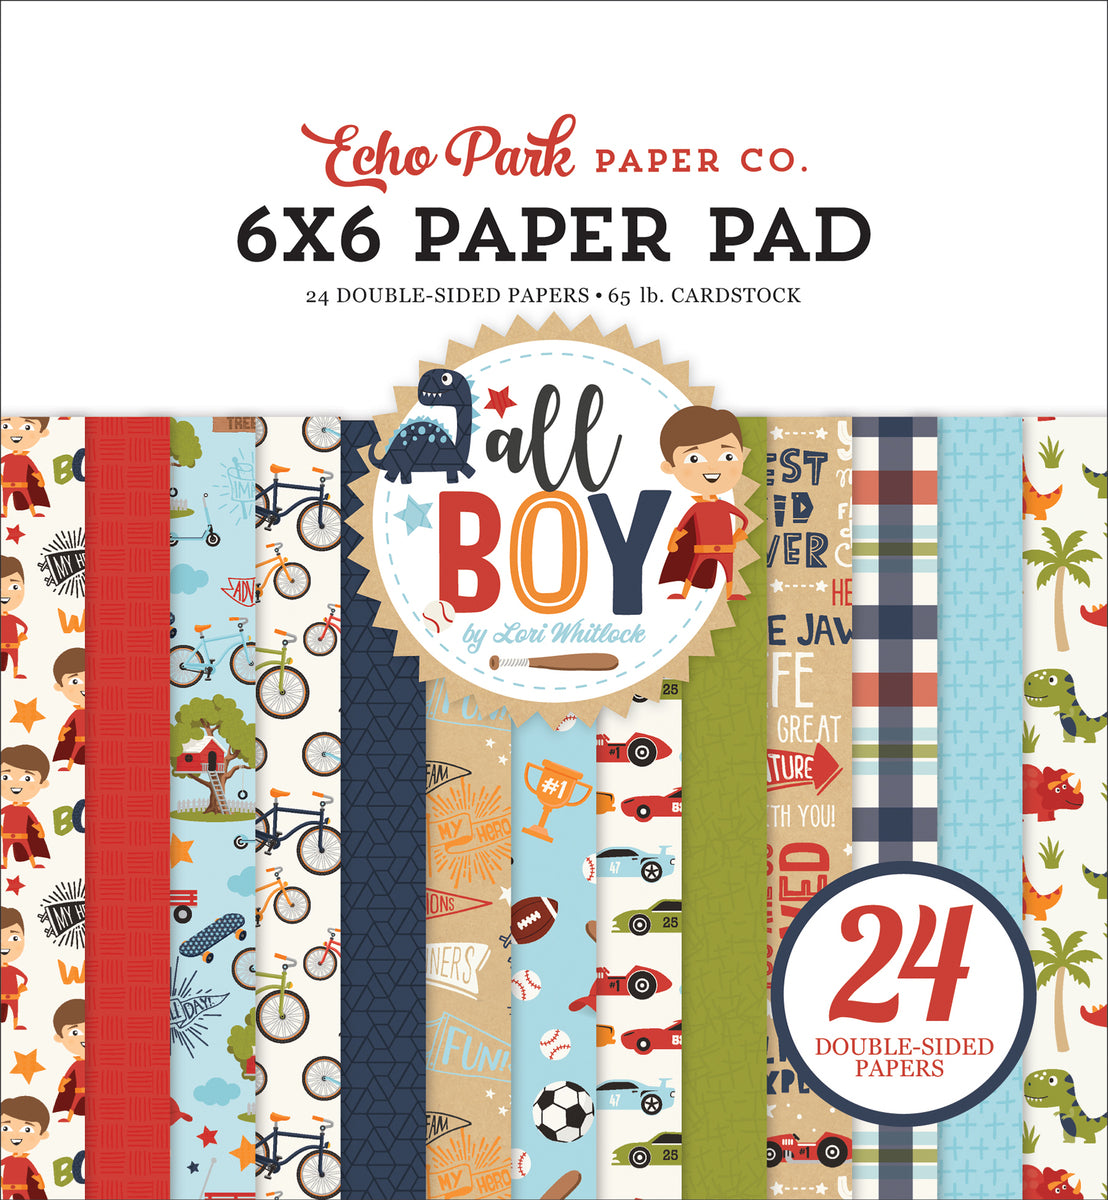 All Boy - 6x6 paper pad with 24 double-sided sheets - Echo Park Paper